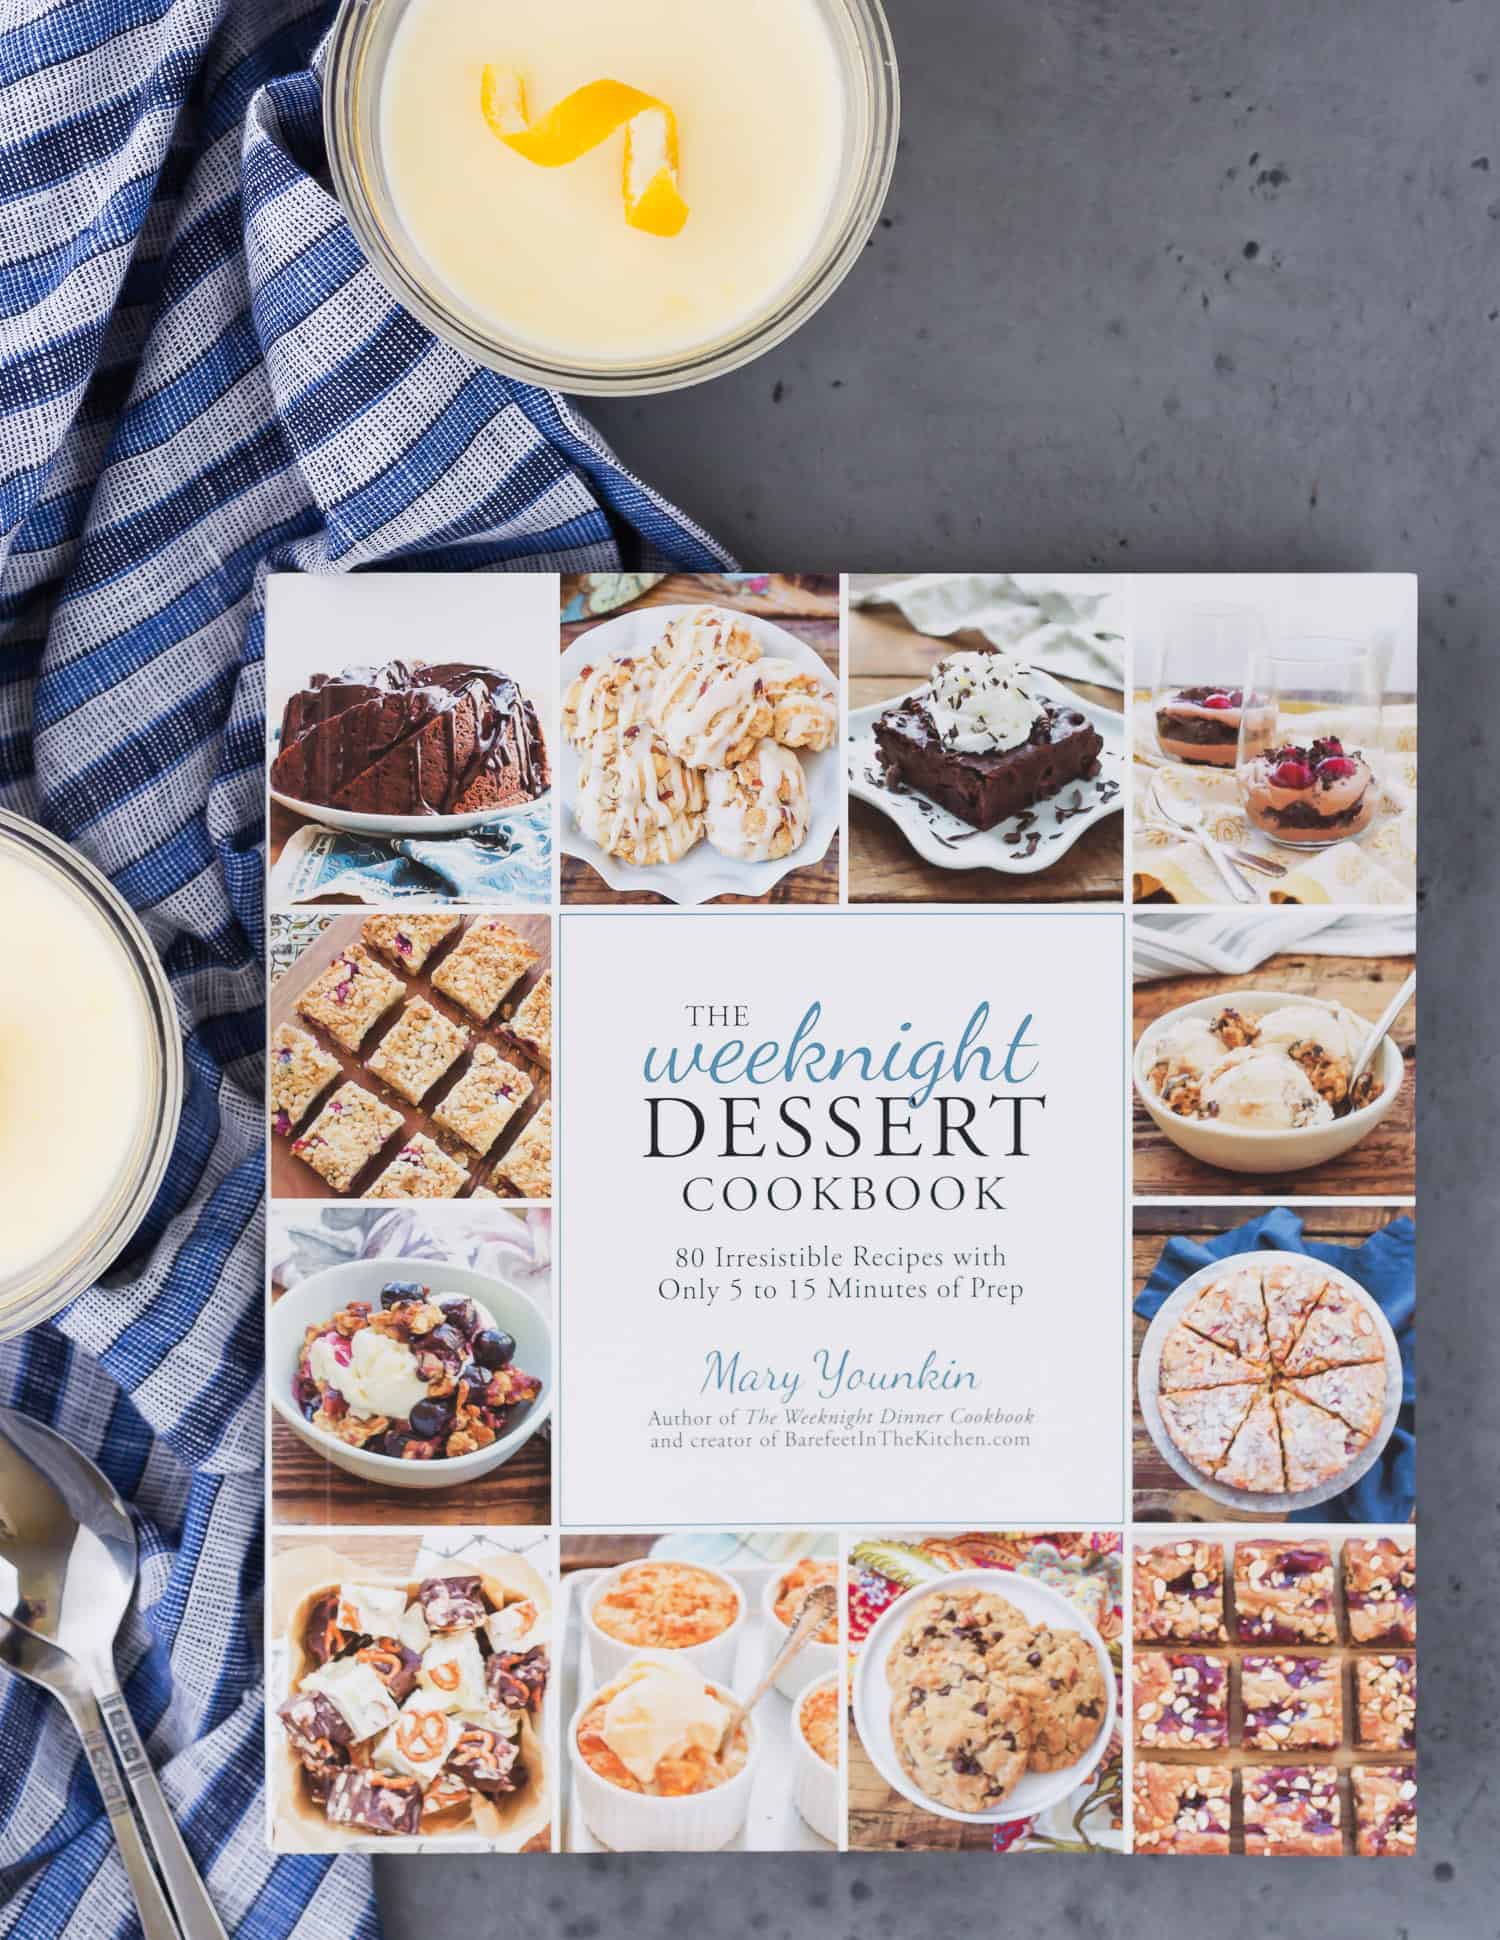 Cover Image of The Weeknight Dessert Cookbook by Mary Younkin.